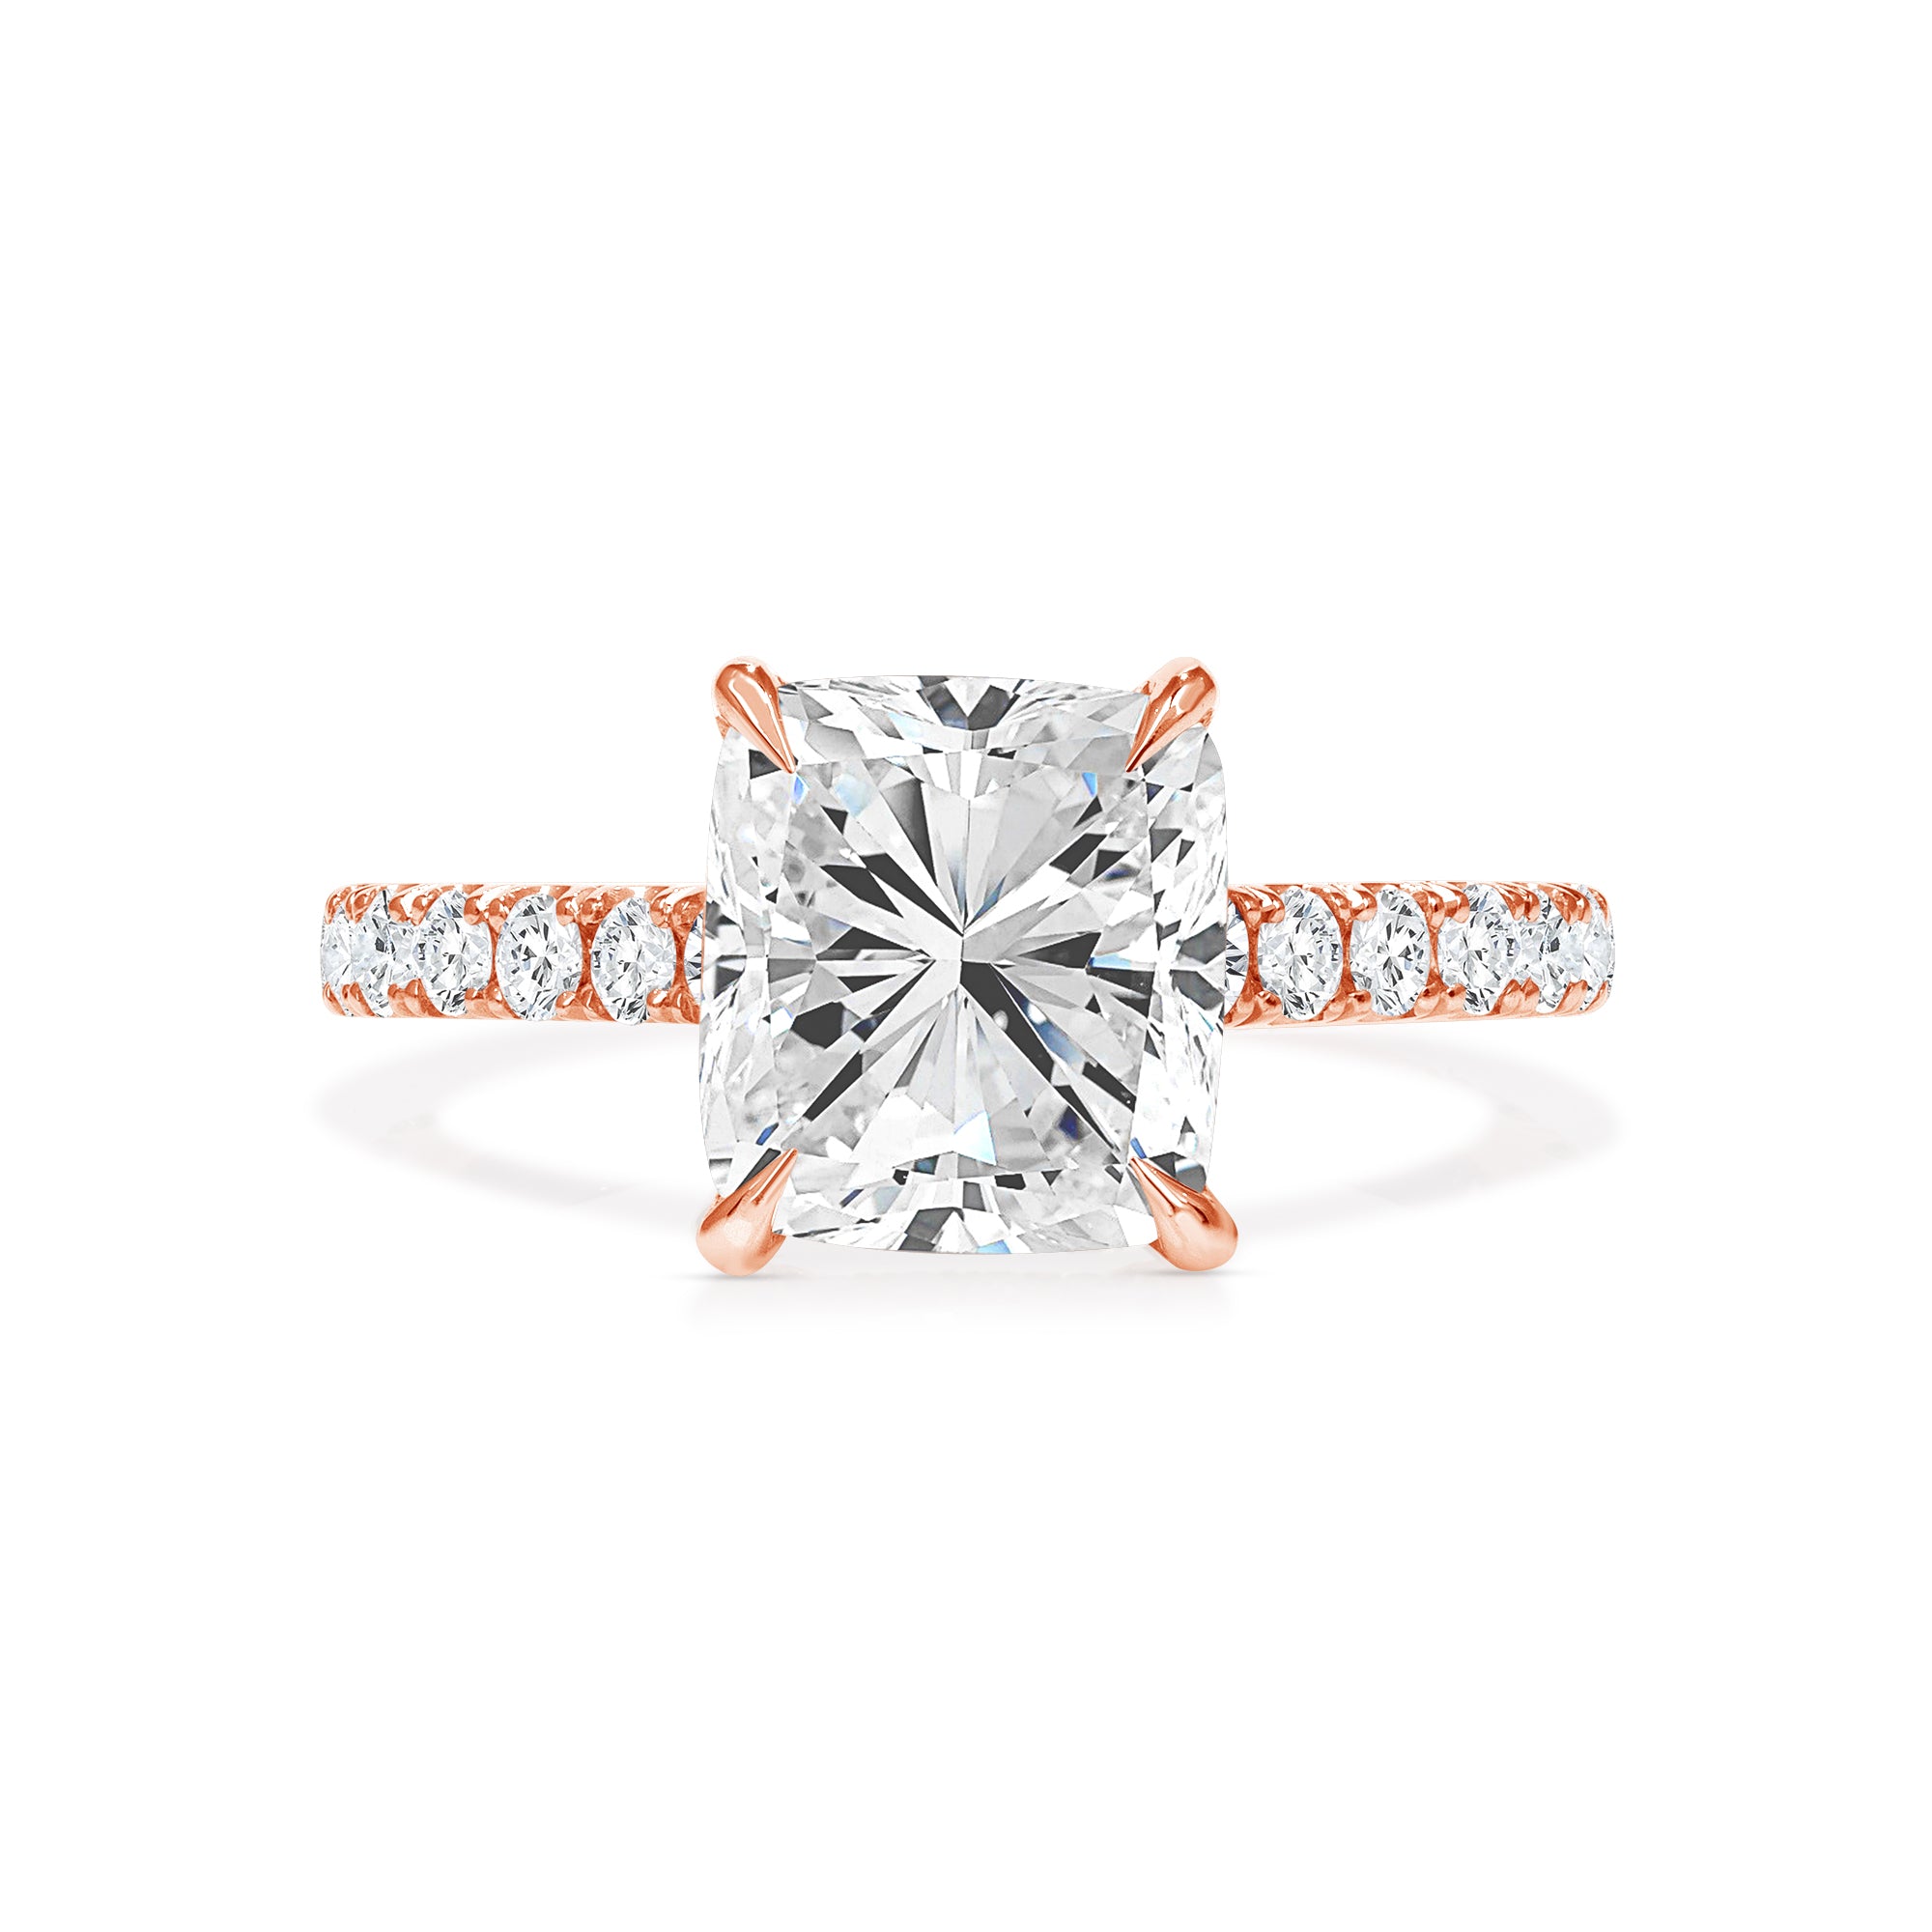 2.22ct Cushion Cut Diamond Engagement Ring in 14k Rose Gold Band, GIA Certified